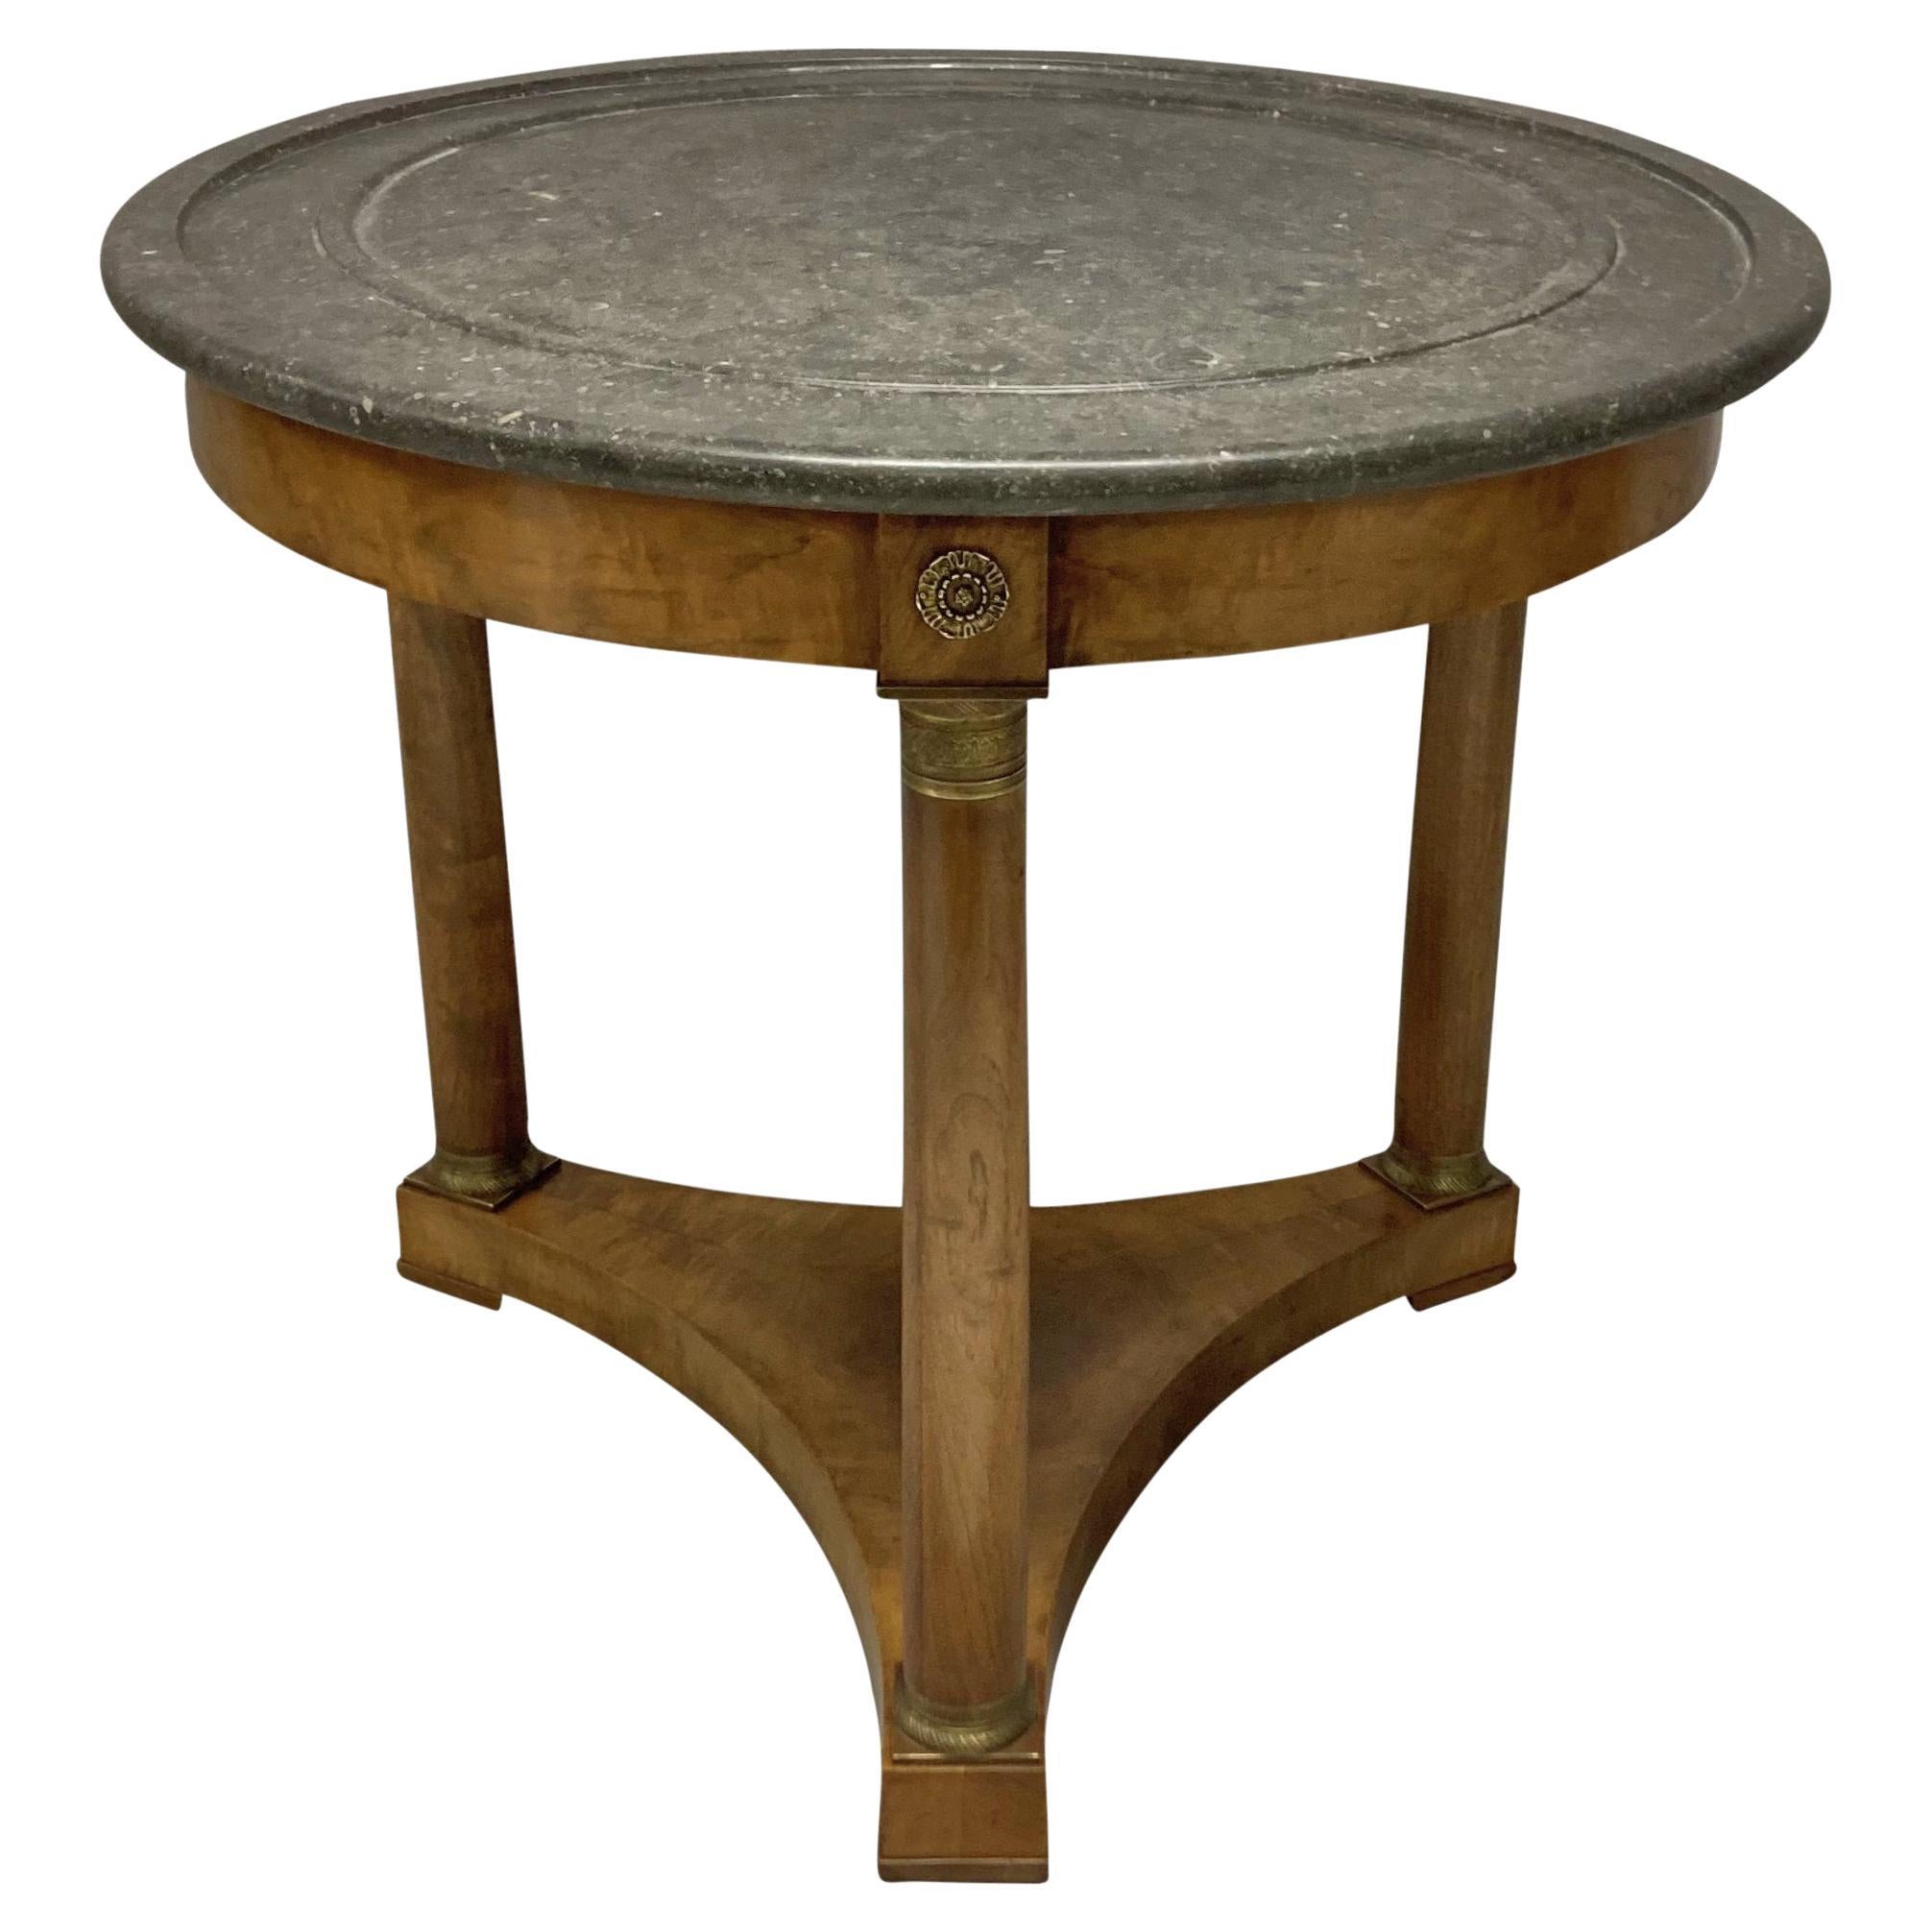 French Empire Style Gueridon Table